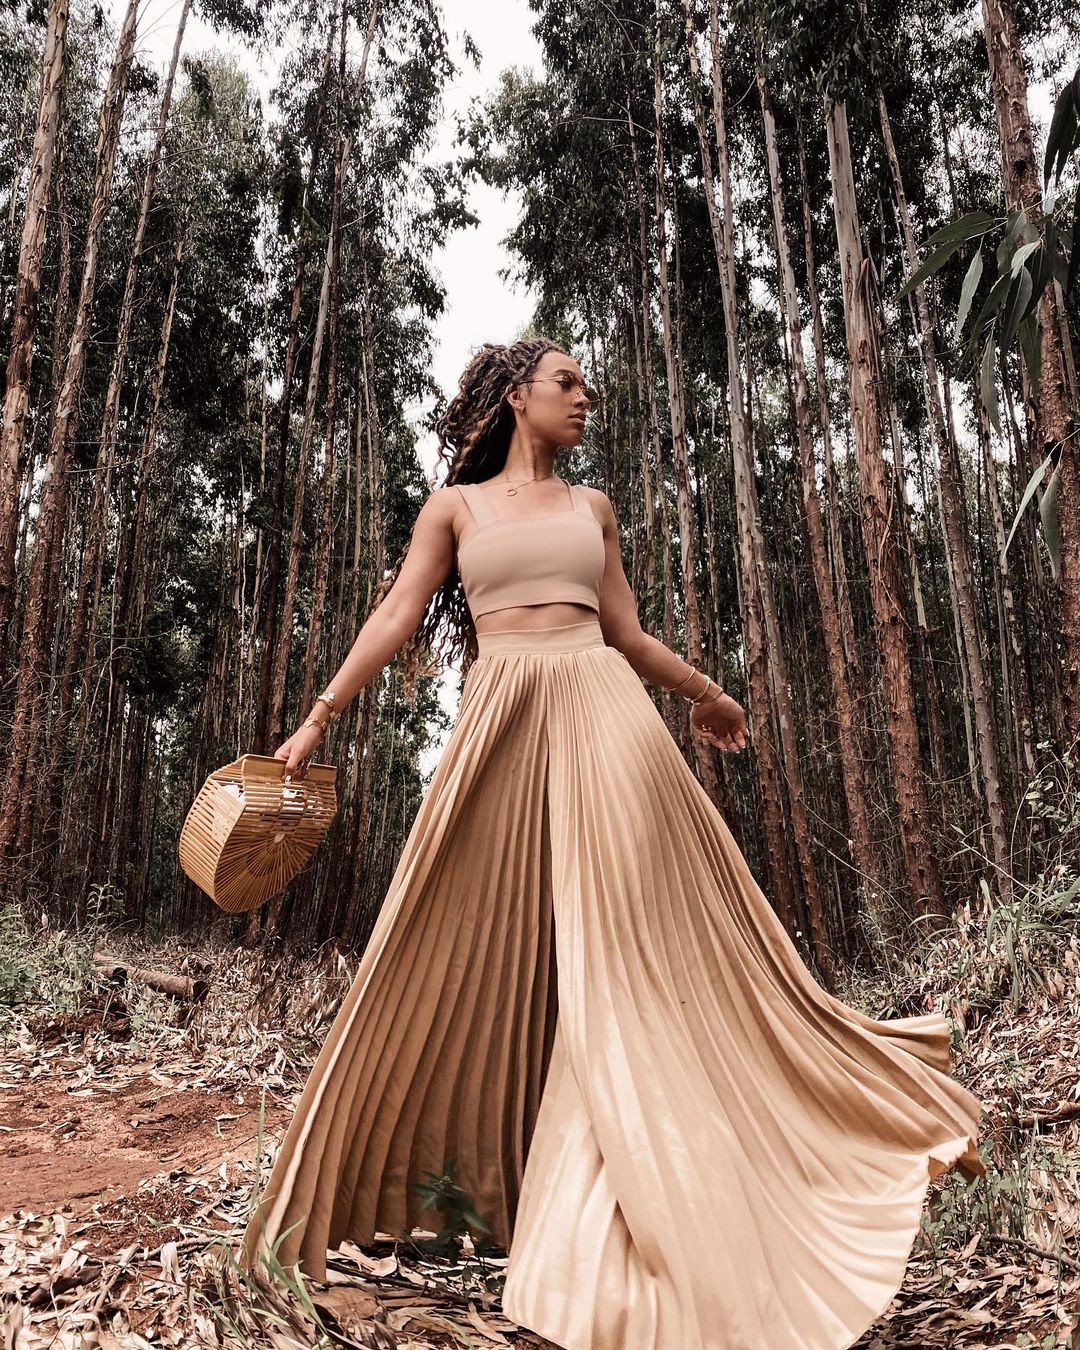  Sarah Langa Struts With Glam In Flare Skirt 